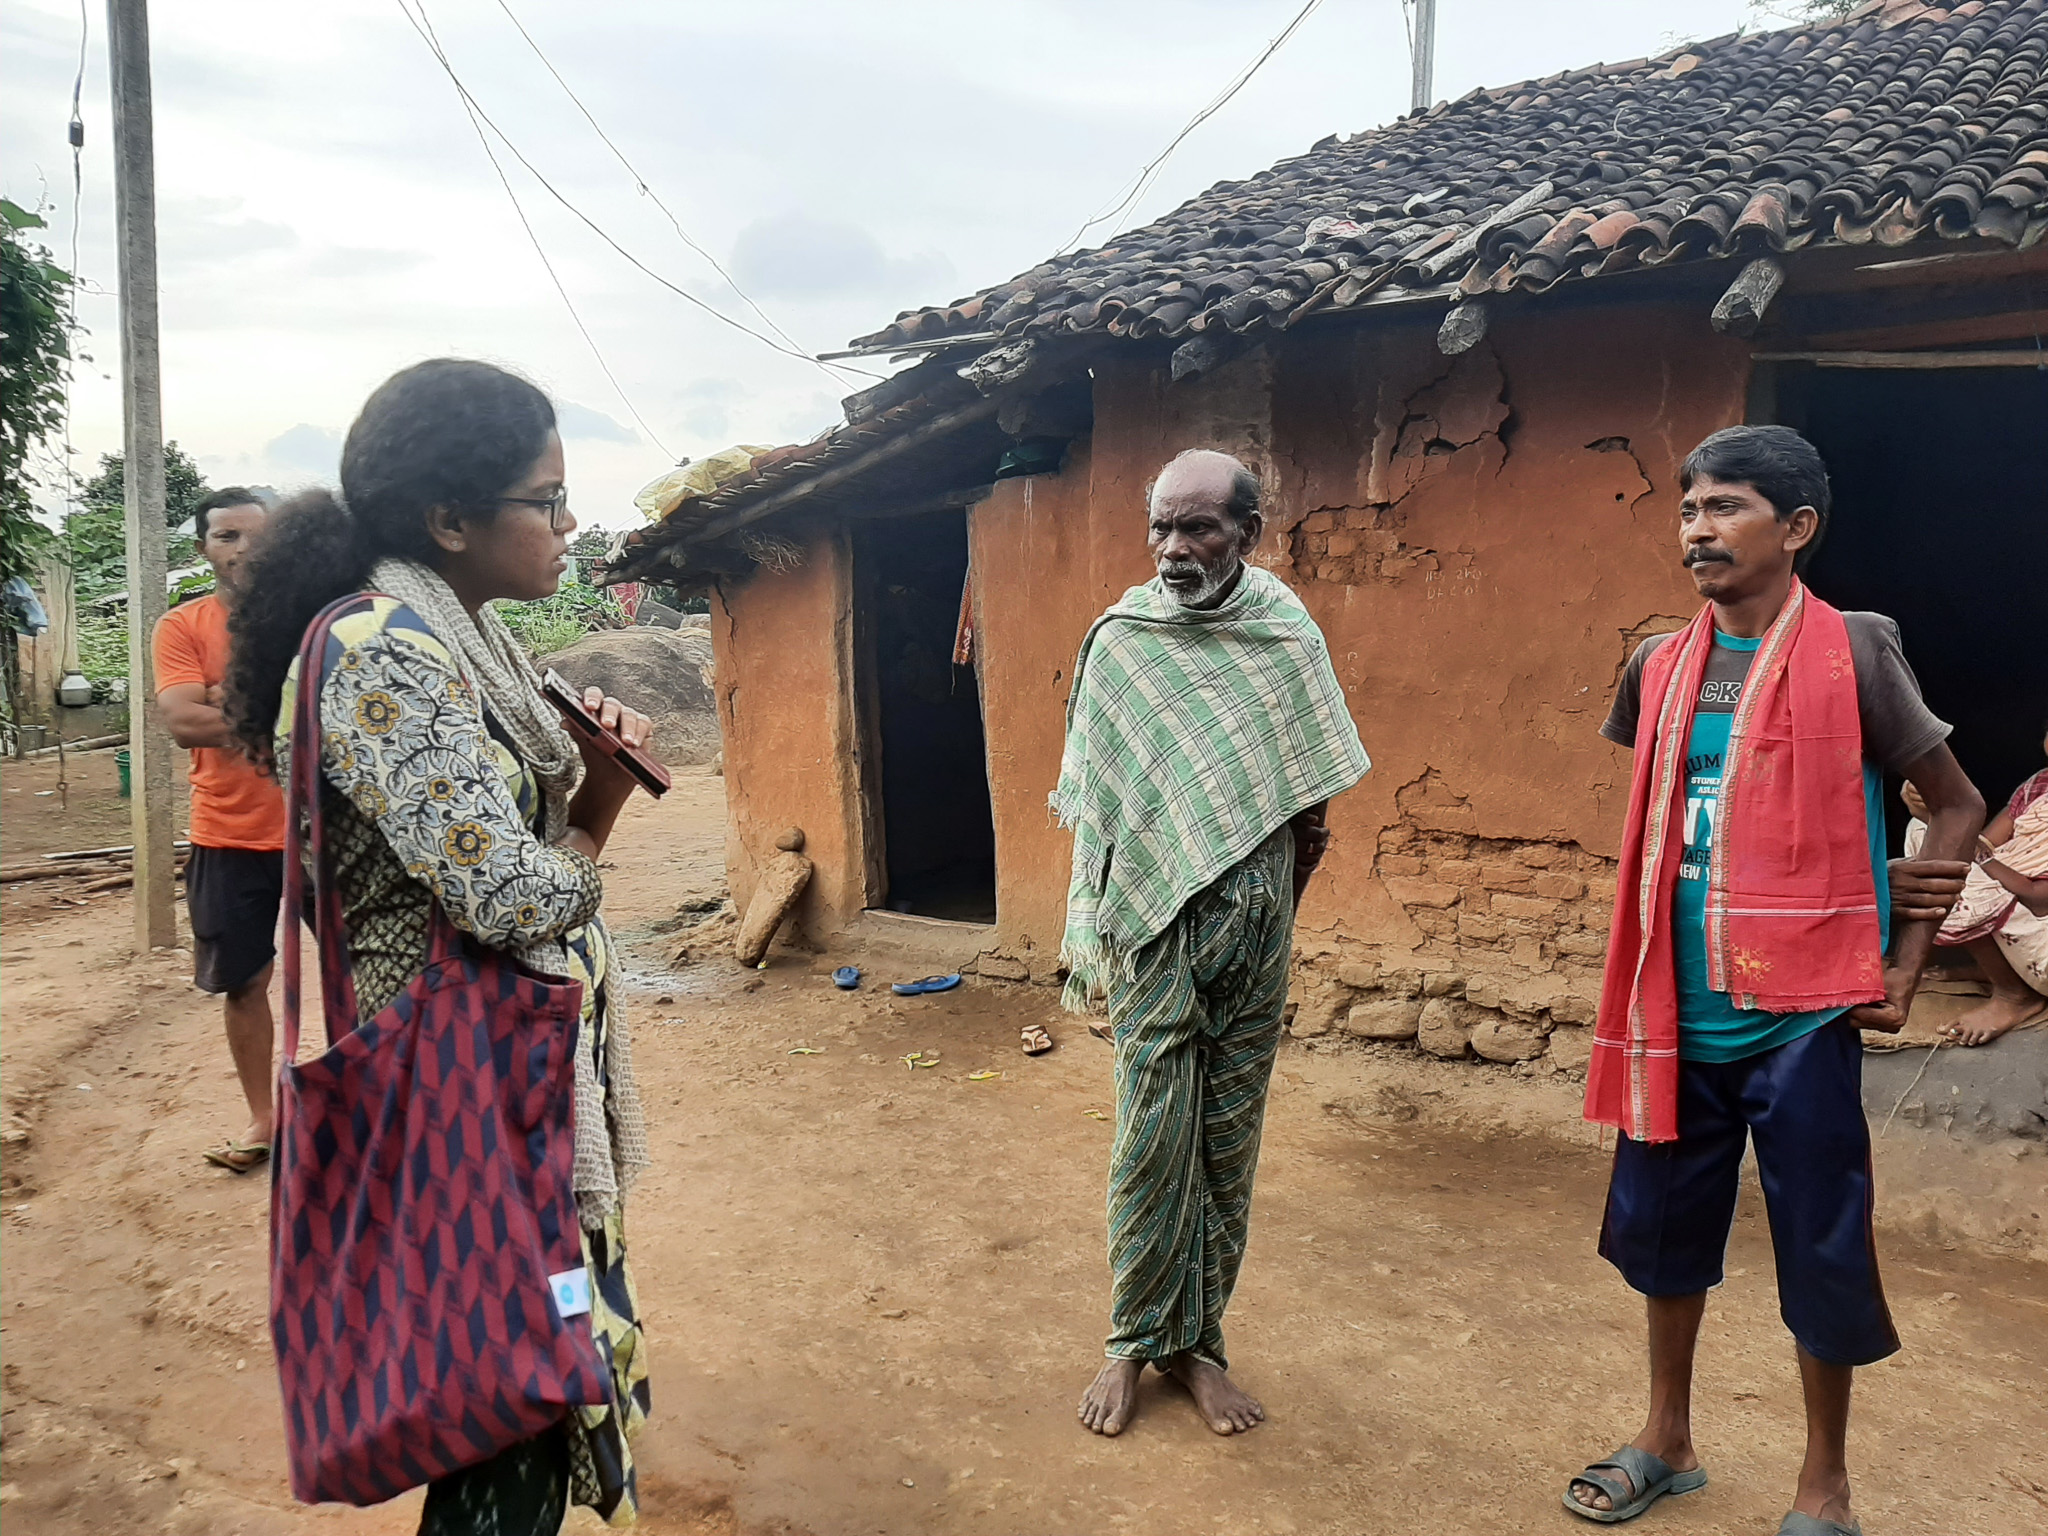 Amrutha Pampackal speaking with two men in a village